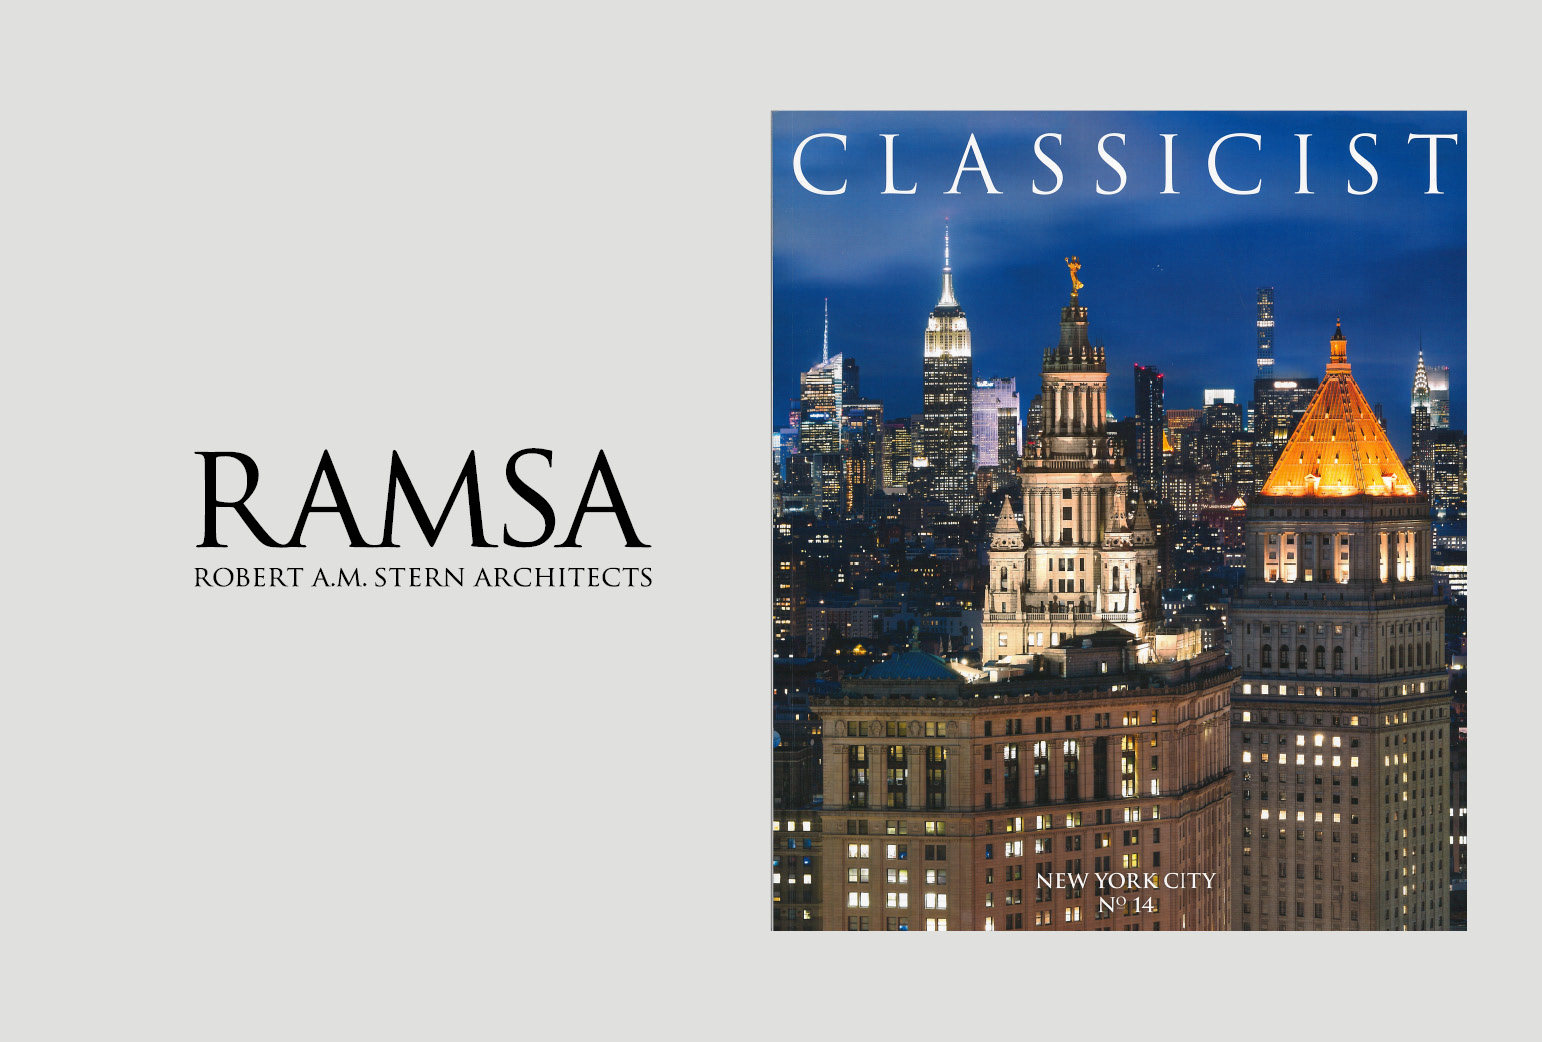 The ICAA's The Classicist No .14 Launch